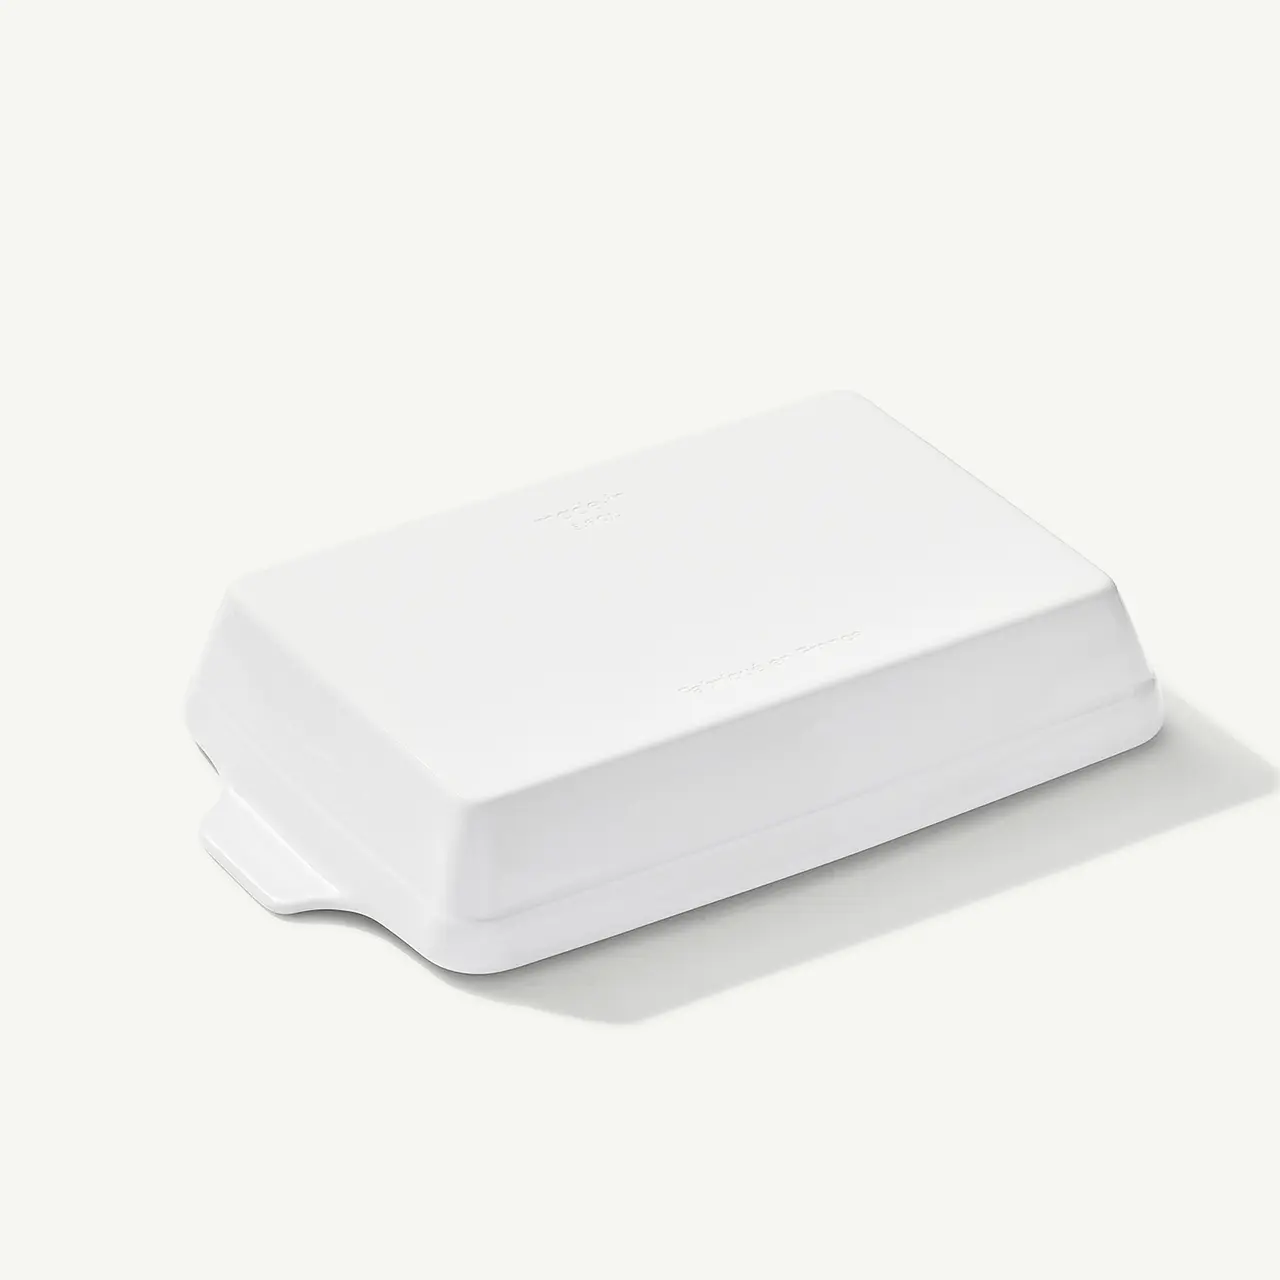 A white rectangular electronic device with a minimalist design sits on a light background.